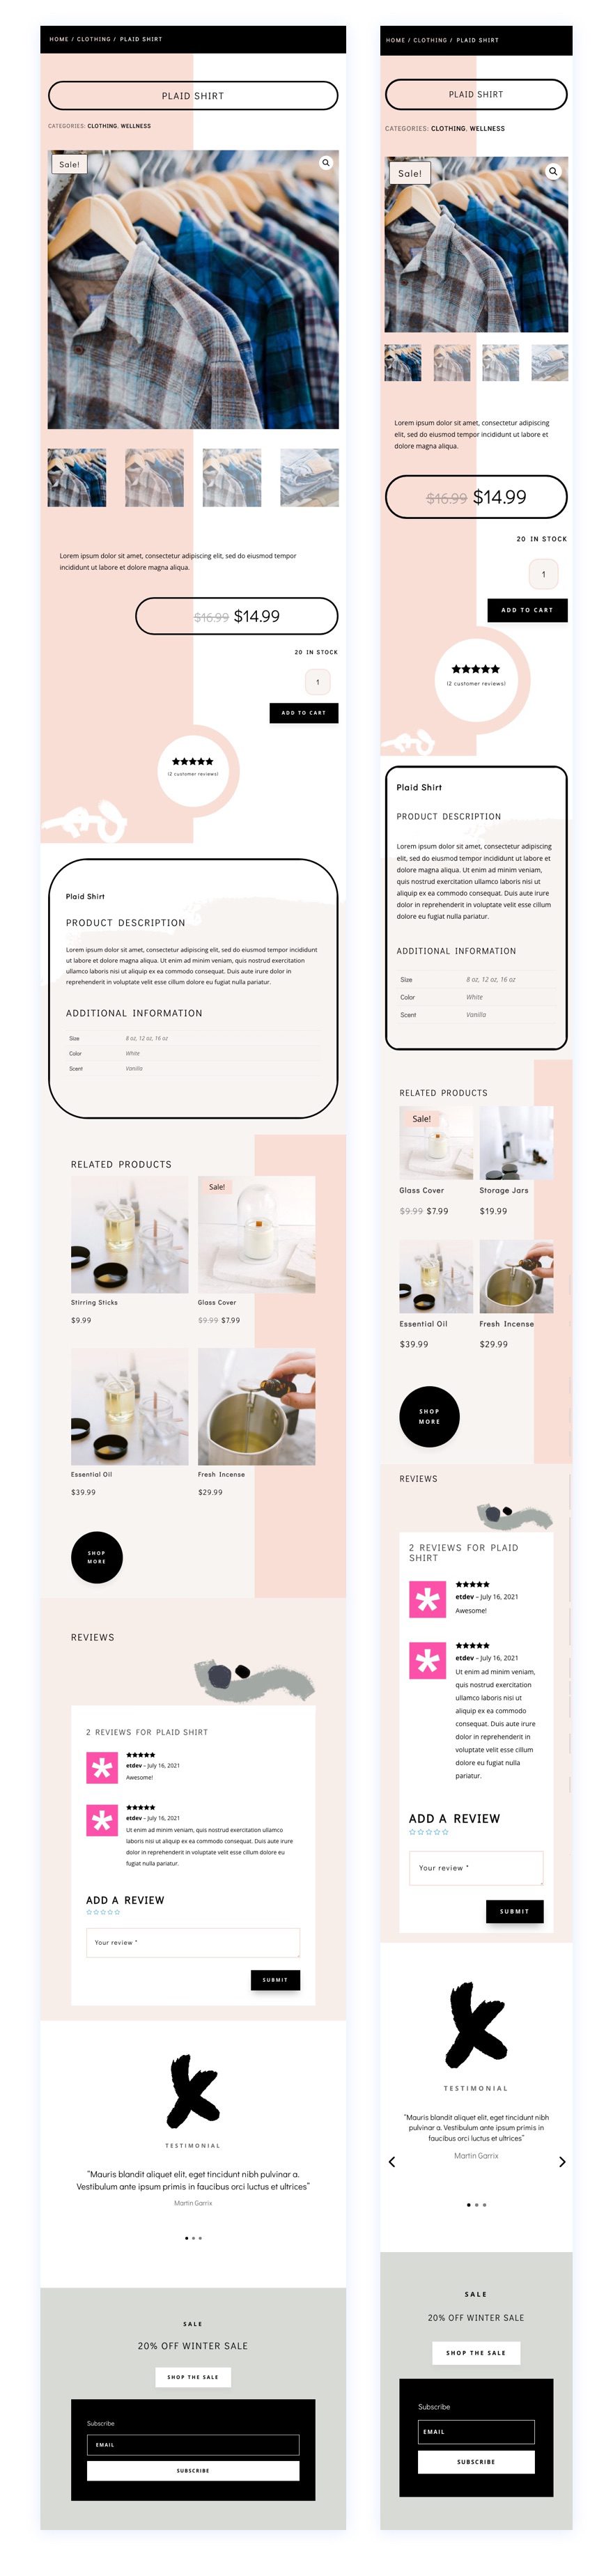 divi clothing store product page template